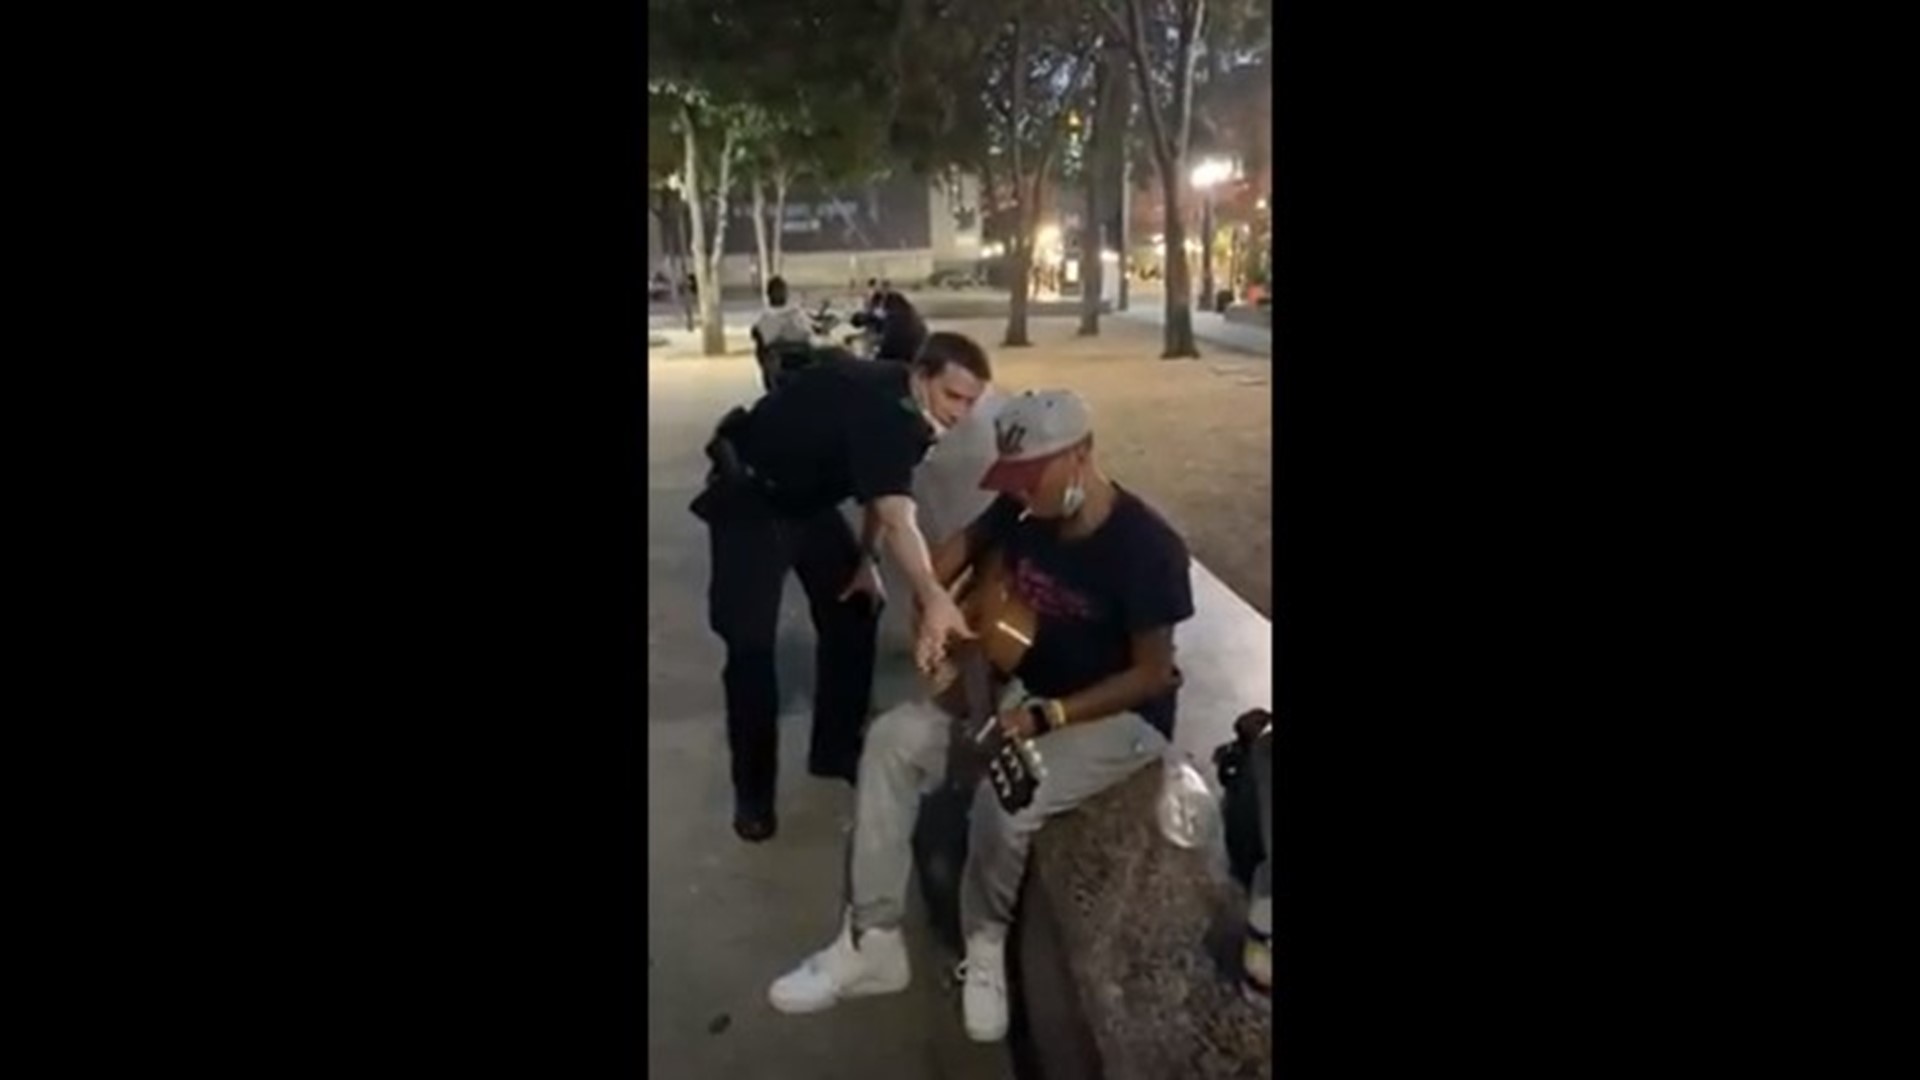 Officer Trainee Michael Morey II wanted to experience community policing on July 4. One moment with a reluctant resident shifted as Morey picked up her guitar.